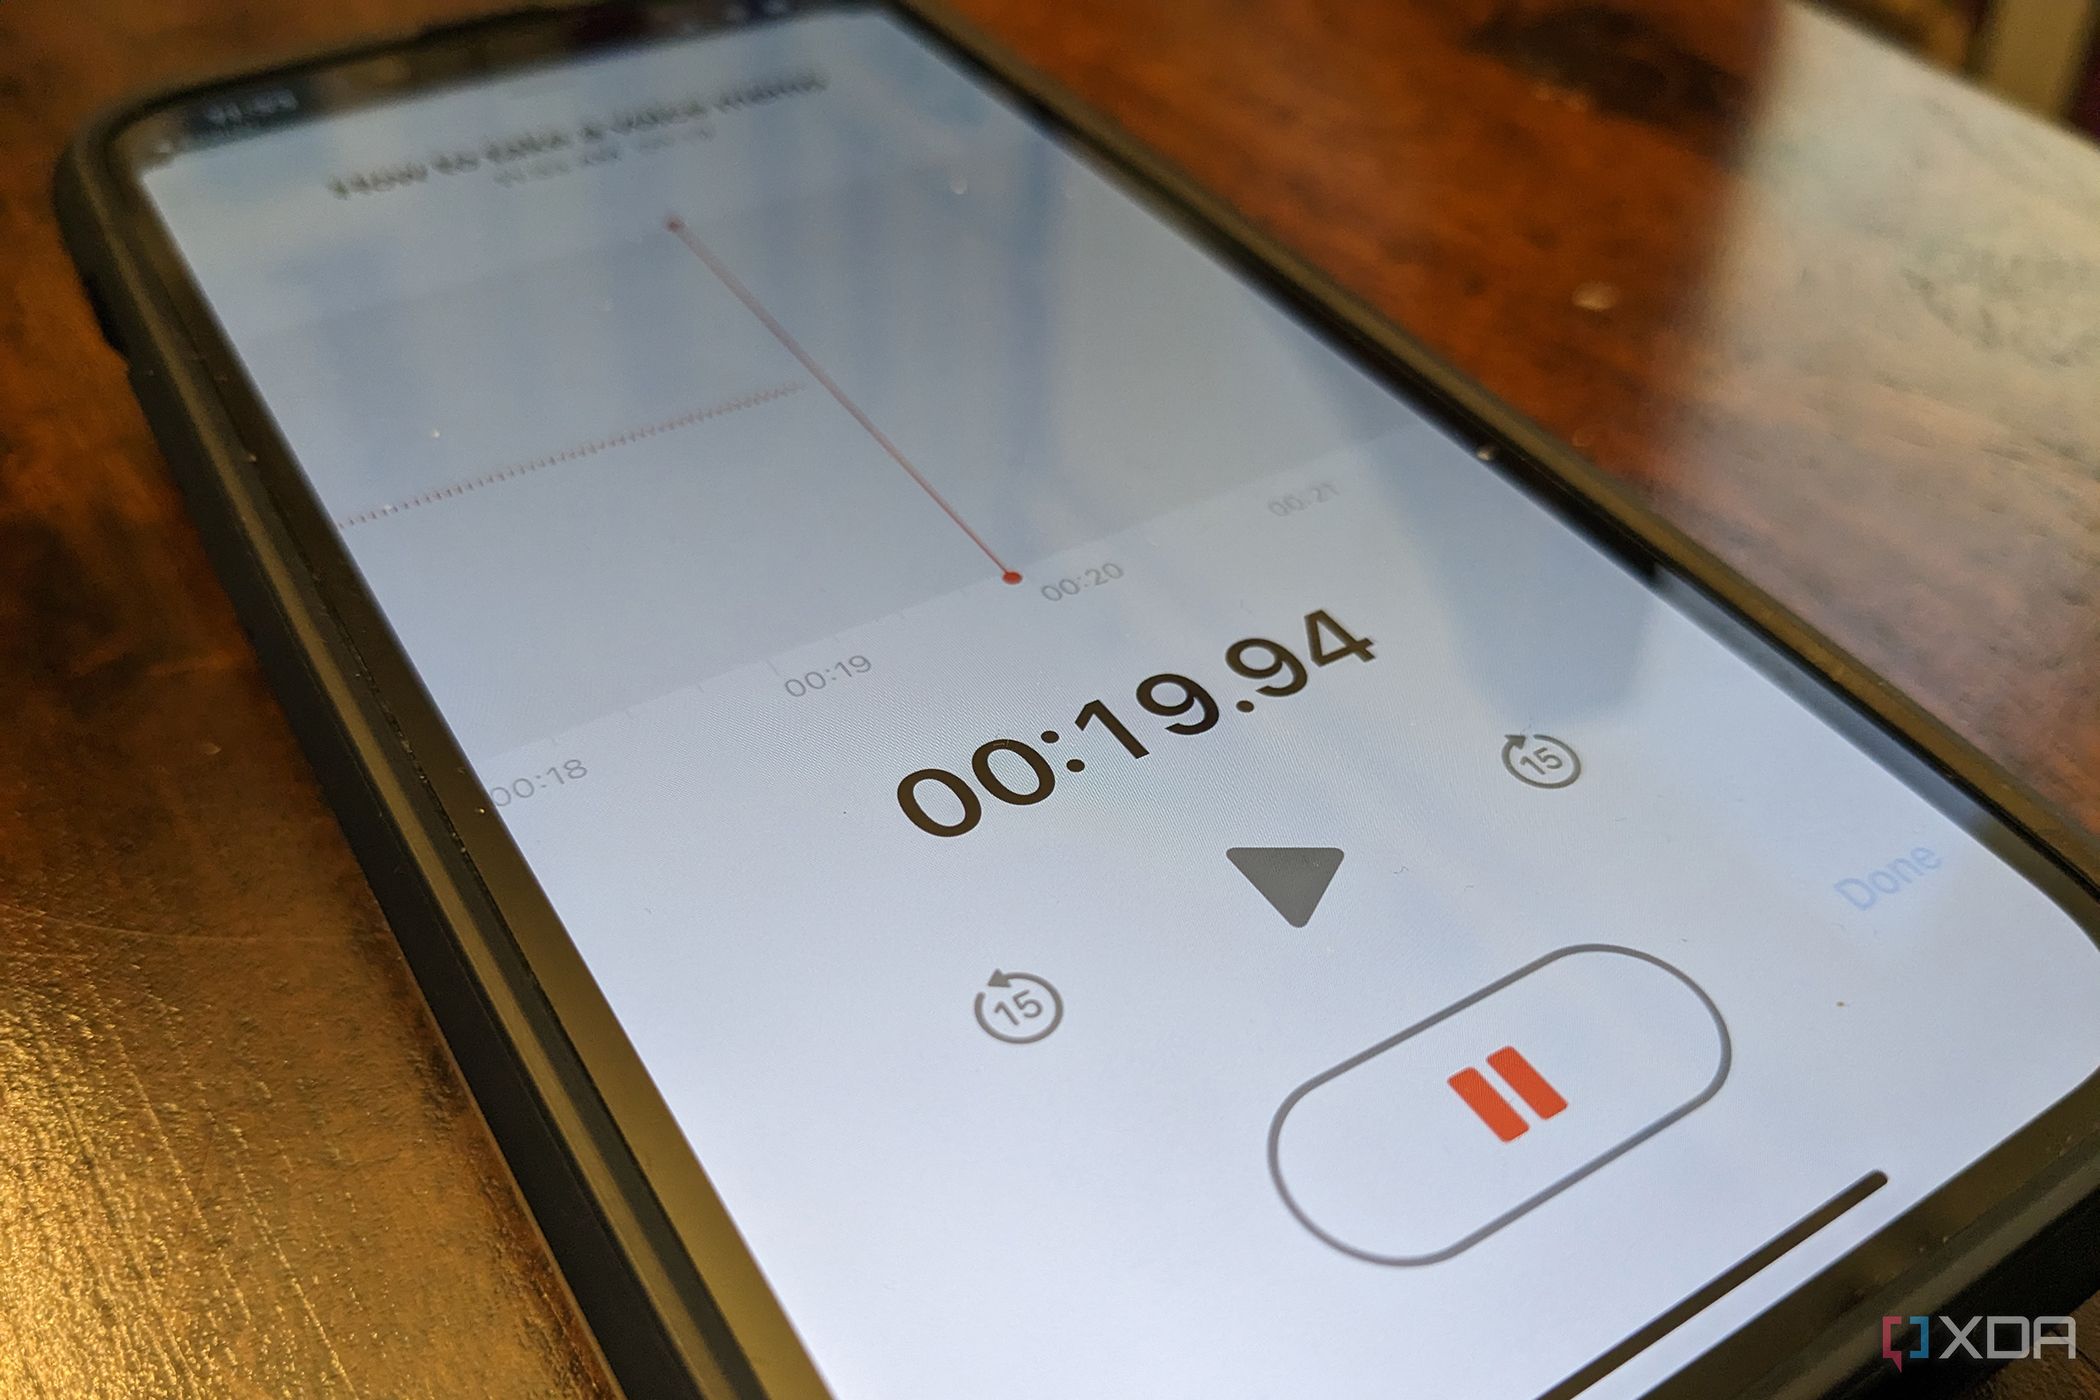 An iPhone on an angle showing a recording in progress in the Voice Memo app.